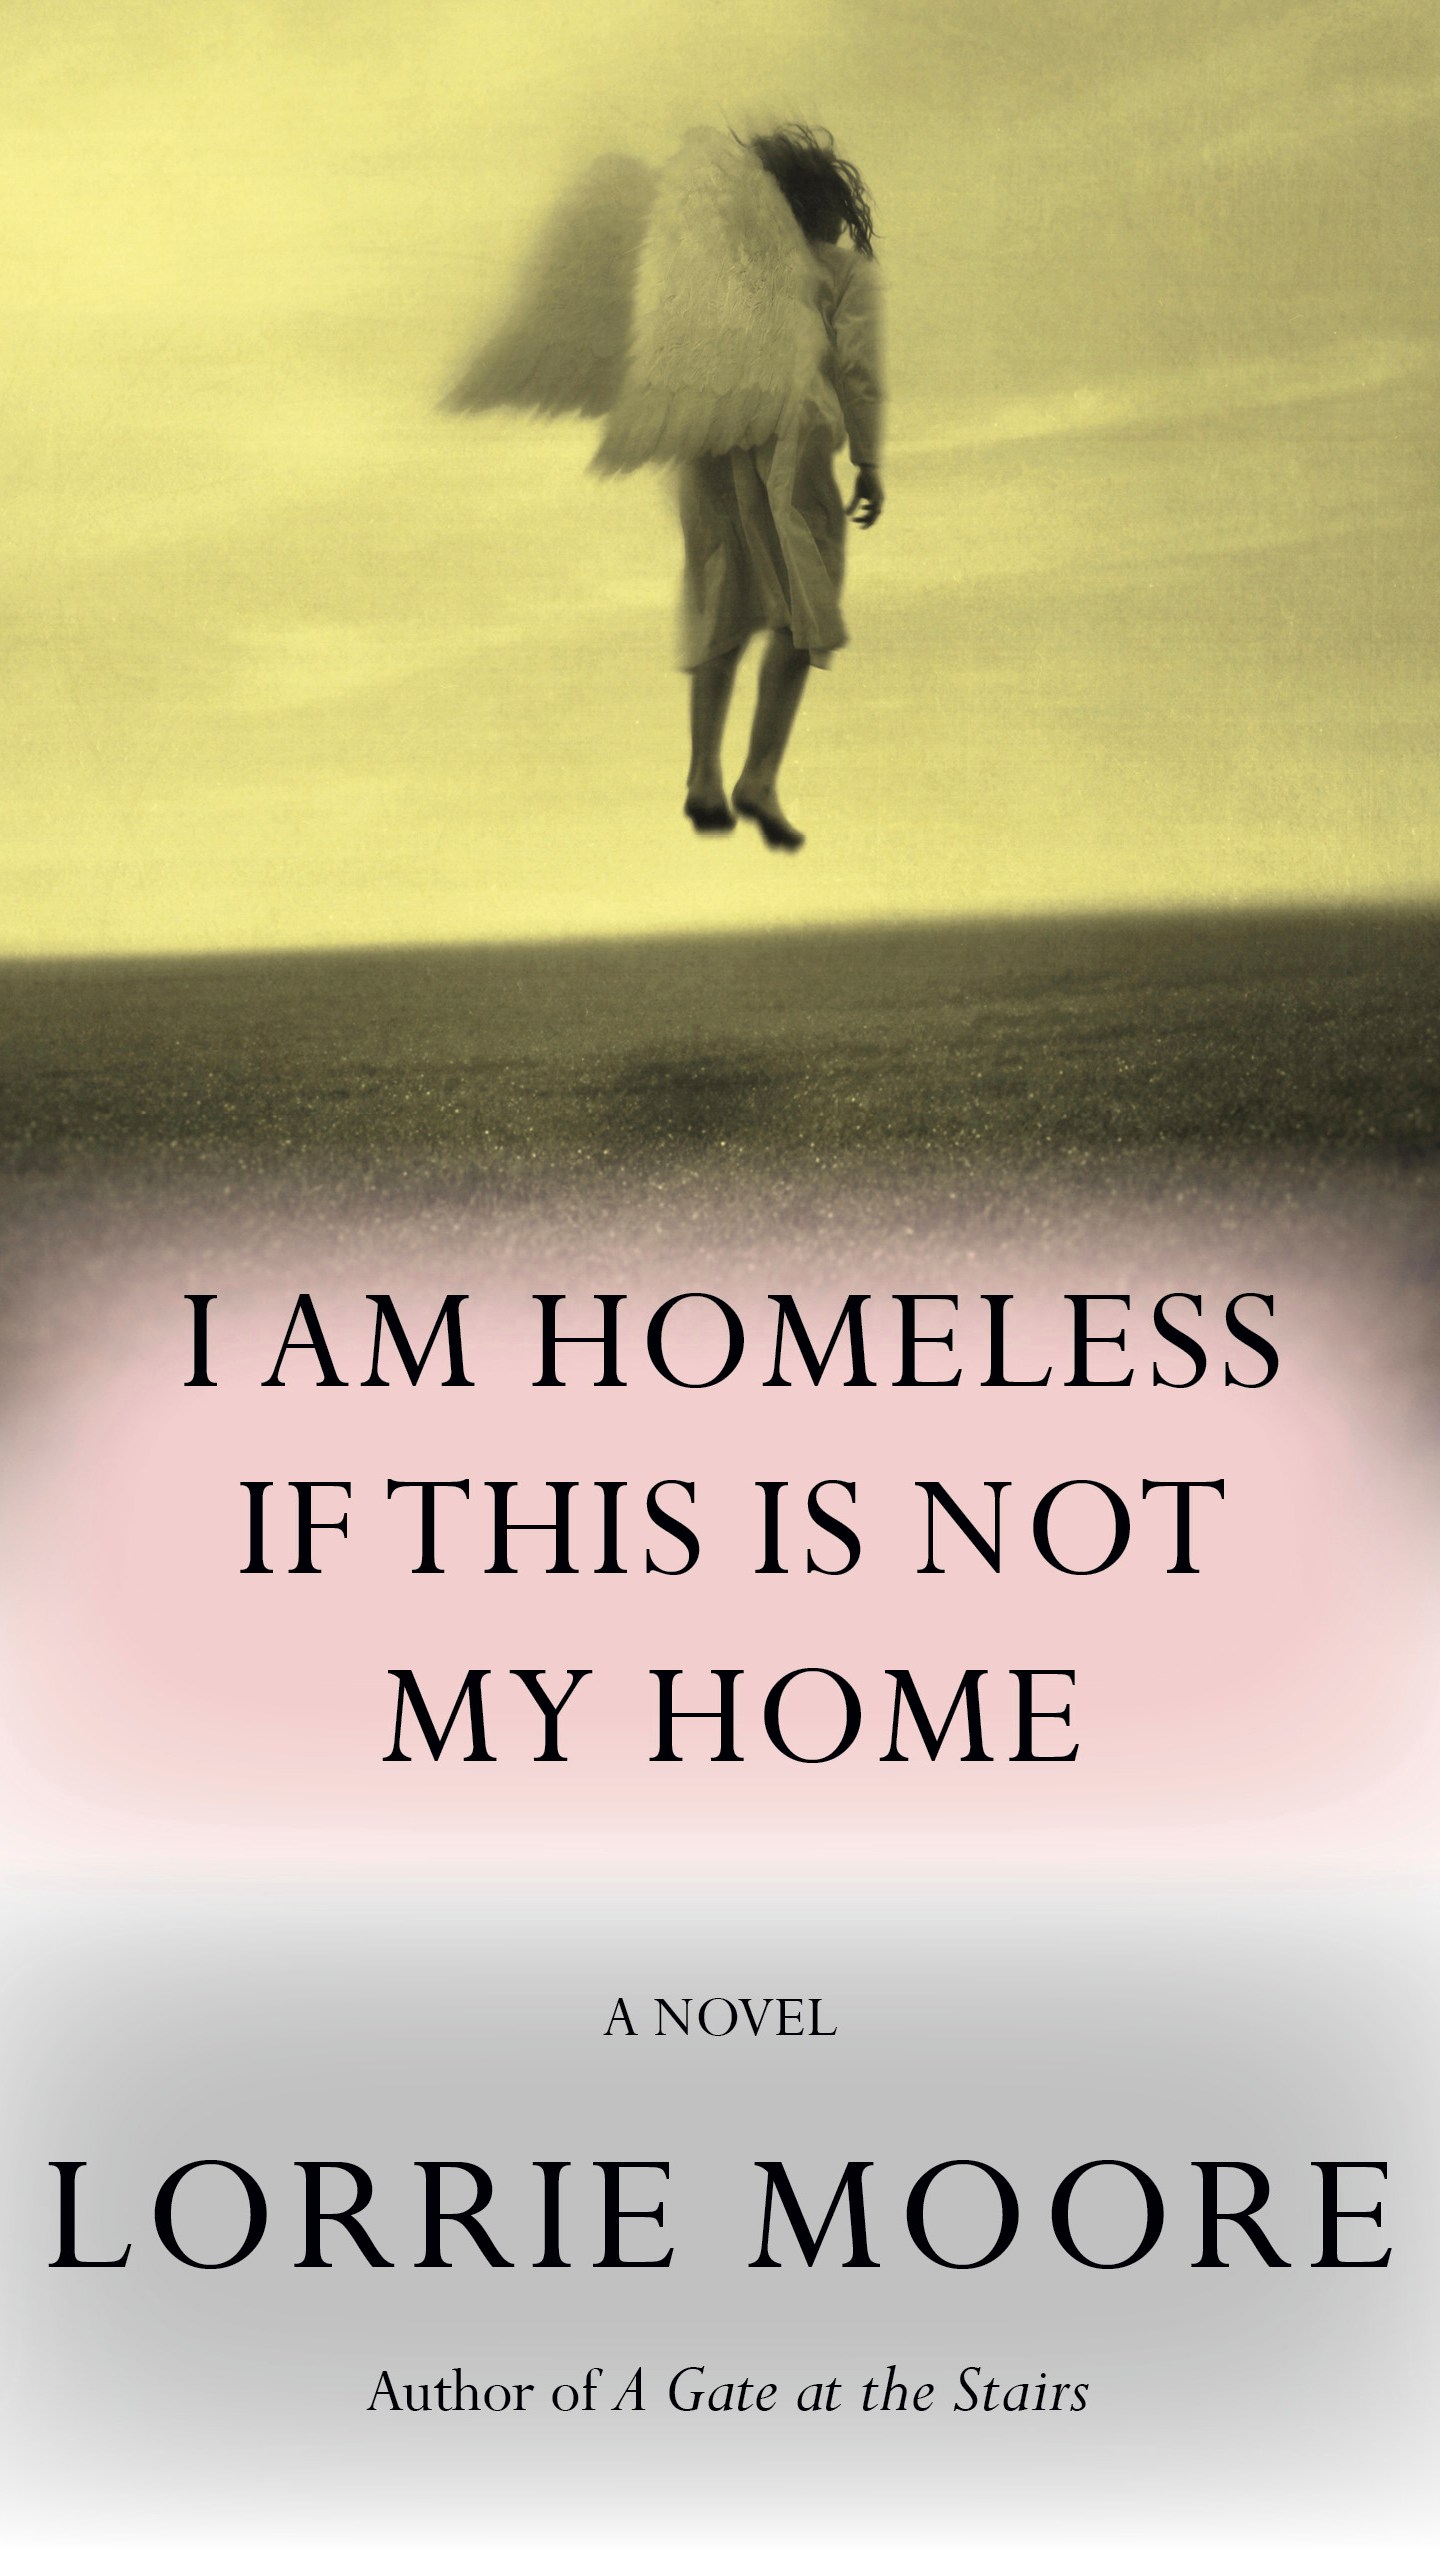 FILE - This cover image released by Knopf shows "I am Homeless if this is Not My Home " by Lorrie Moore. On Thursday, Jan. 25, 2024, the critics circle announced nominees in seven competitive categories, ranging from fiction to debut book to best translation. Winners will be announced March 12. Moore is a finalist for fiction, cited for “I Am Homeless if This Is Not My Home,” one of the few novels from an author best known for short stories. (Knopf via AP)